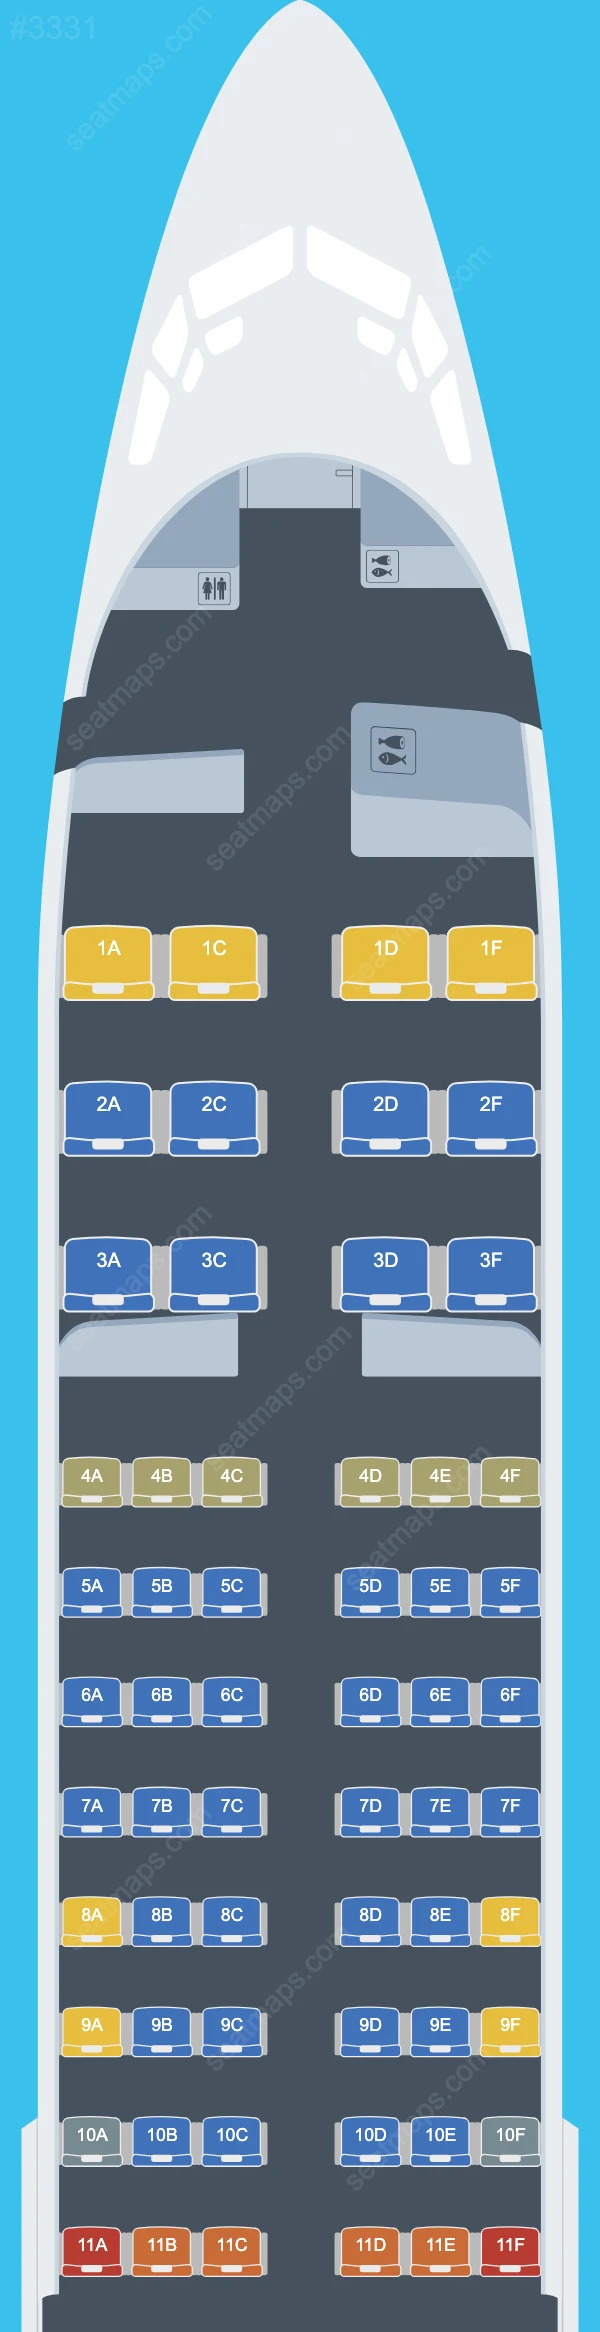 MIAT Mongolian Airlines Boeing 737 Seat Maps 737-800 V.1